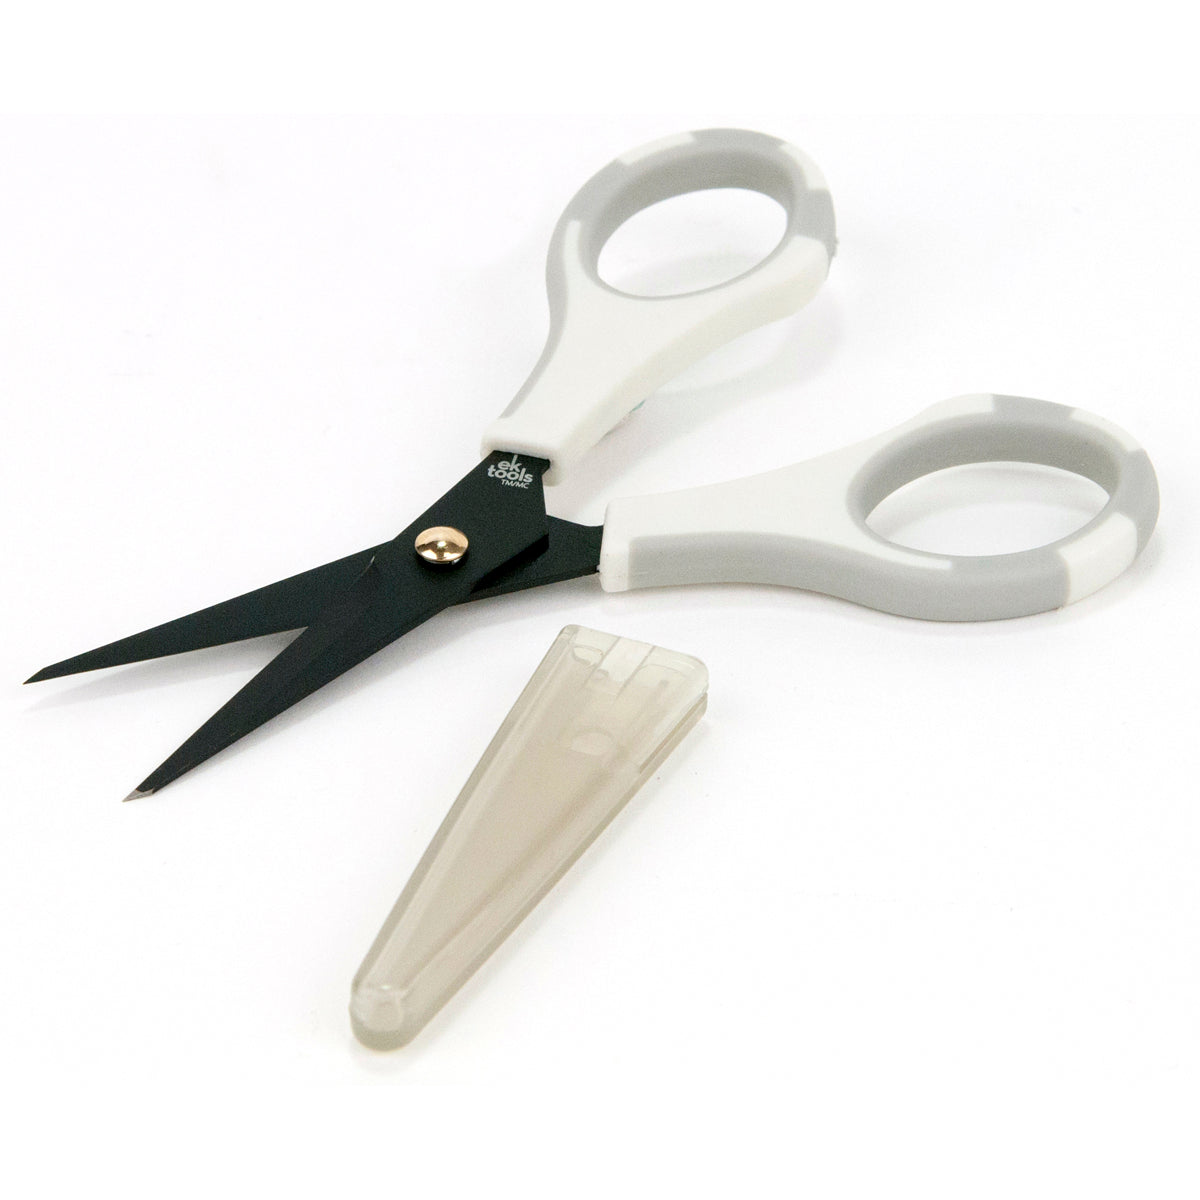  American Crafts Cut Up Scissors, Extra-Fine Tip Gold Grips,  5.5 : Everything Else